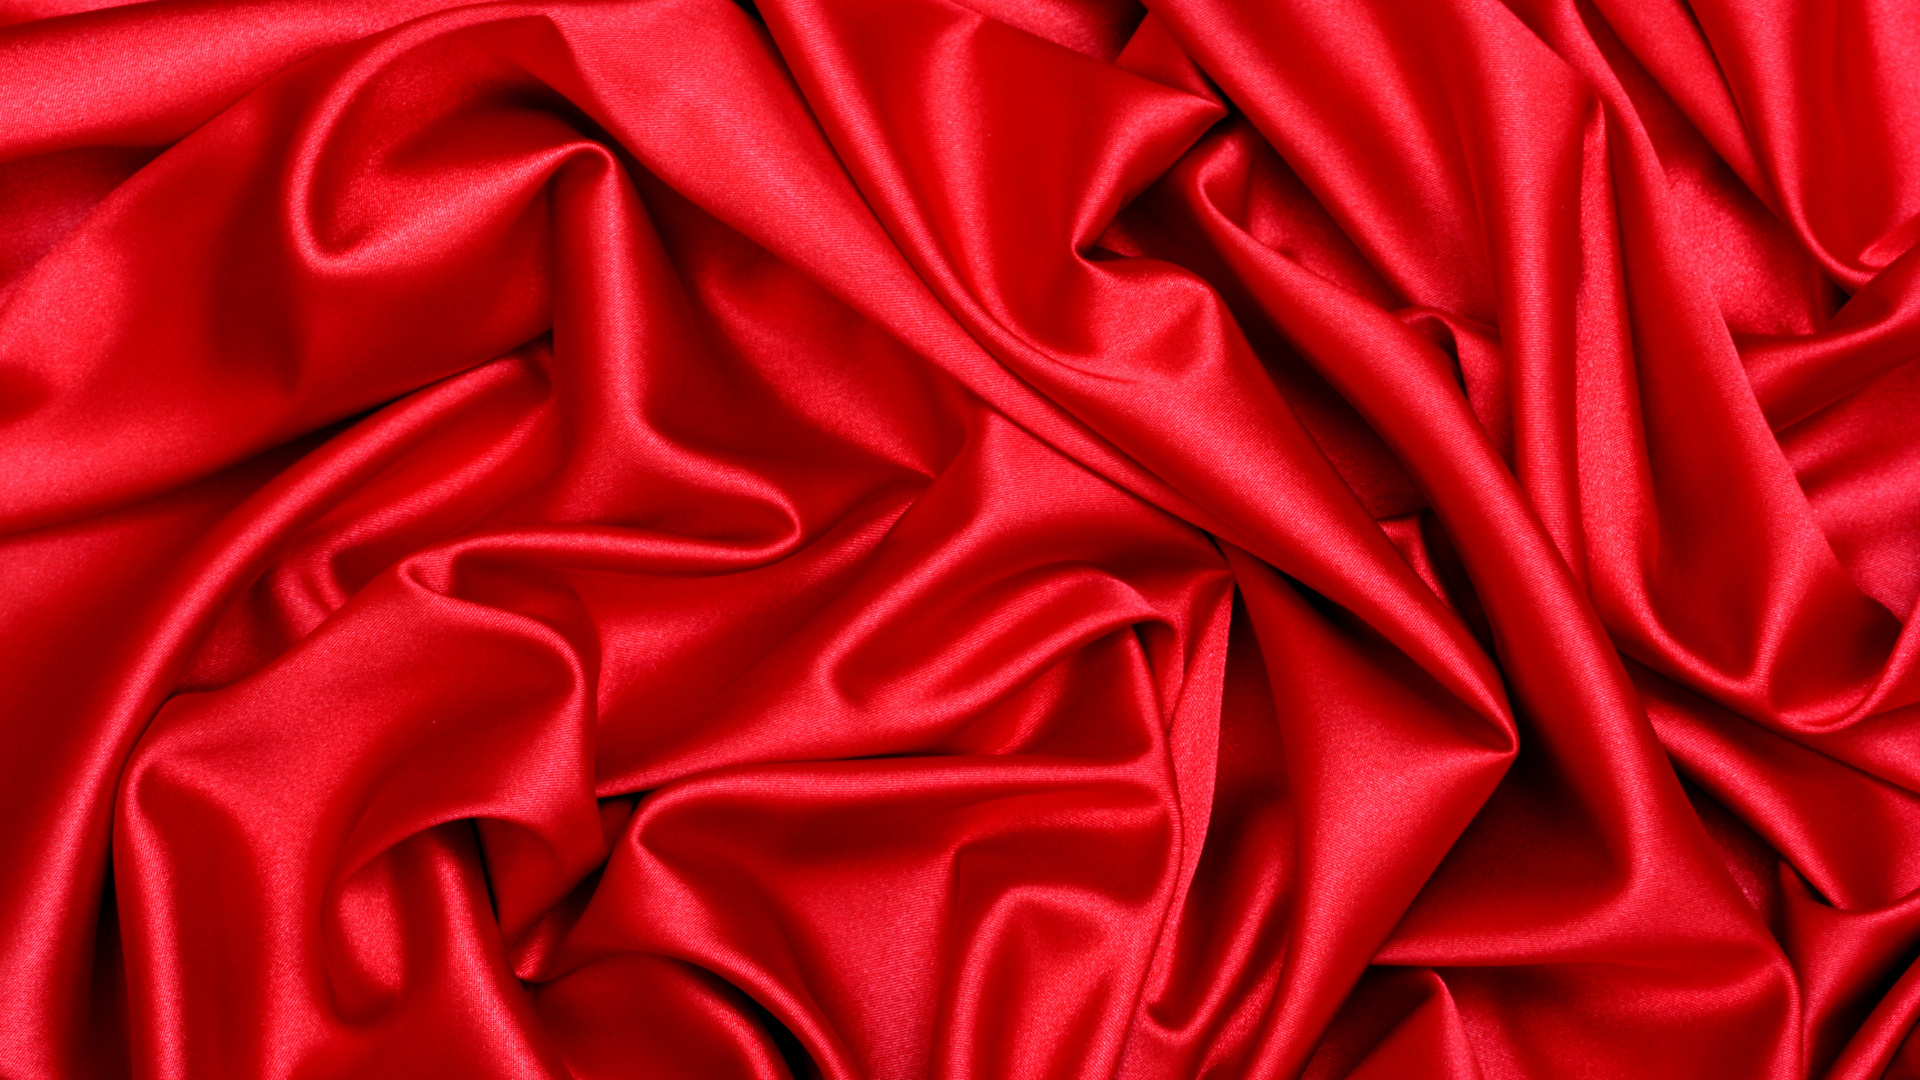 Red Textile in Close up Photography. Wallpaper in 1920x1080 Resolution